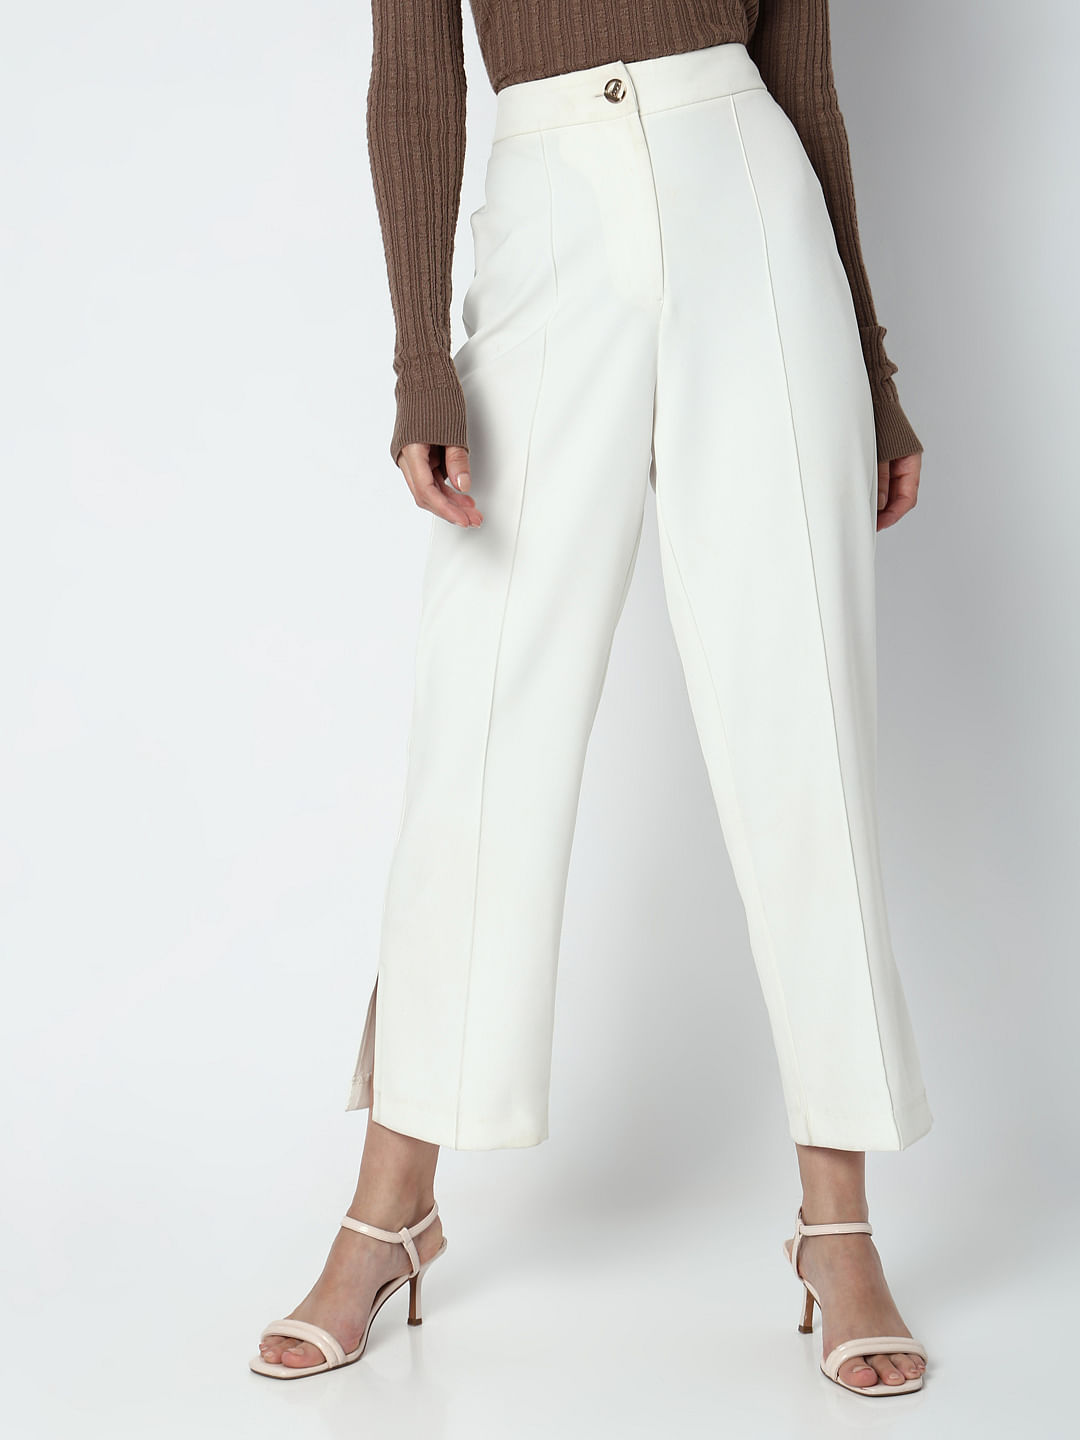 White extra flare fit pants & trousers for women casual and office wear.